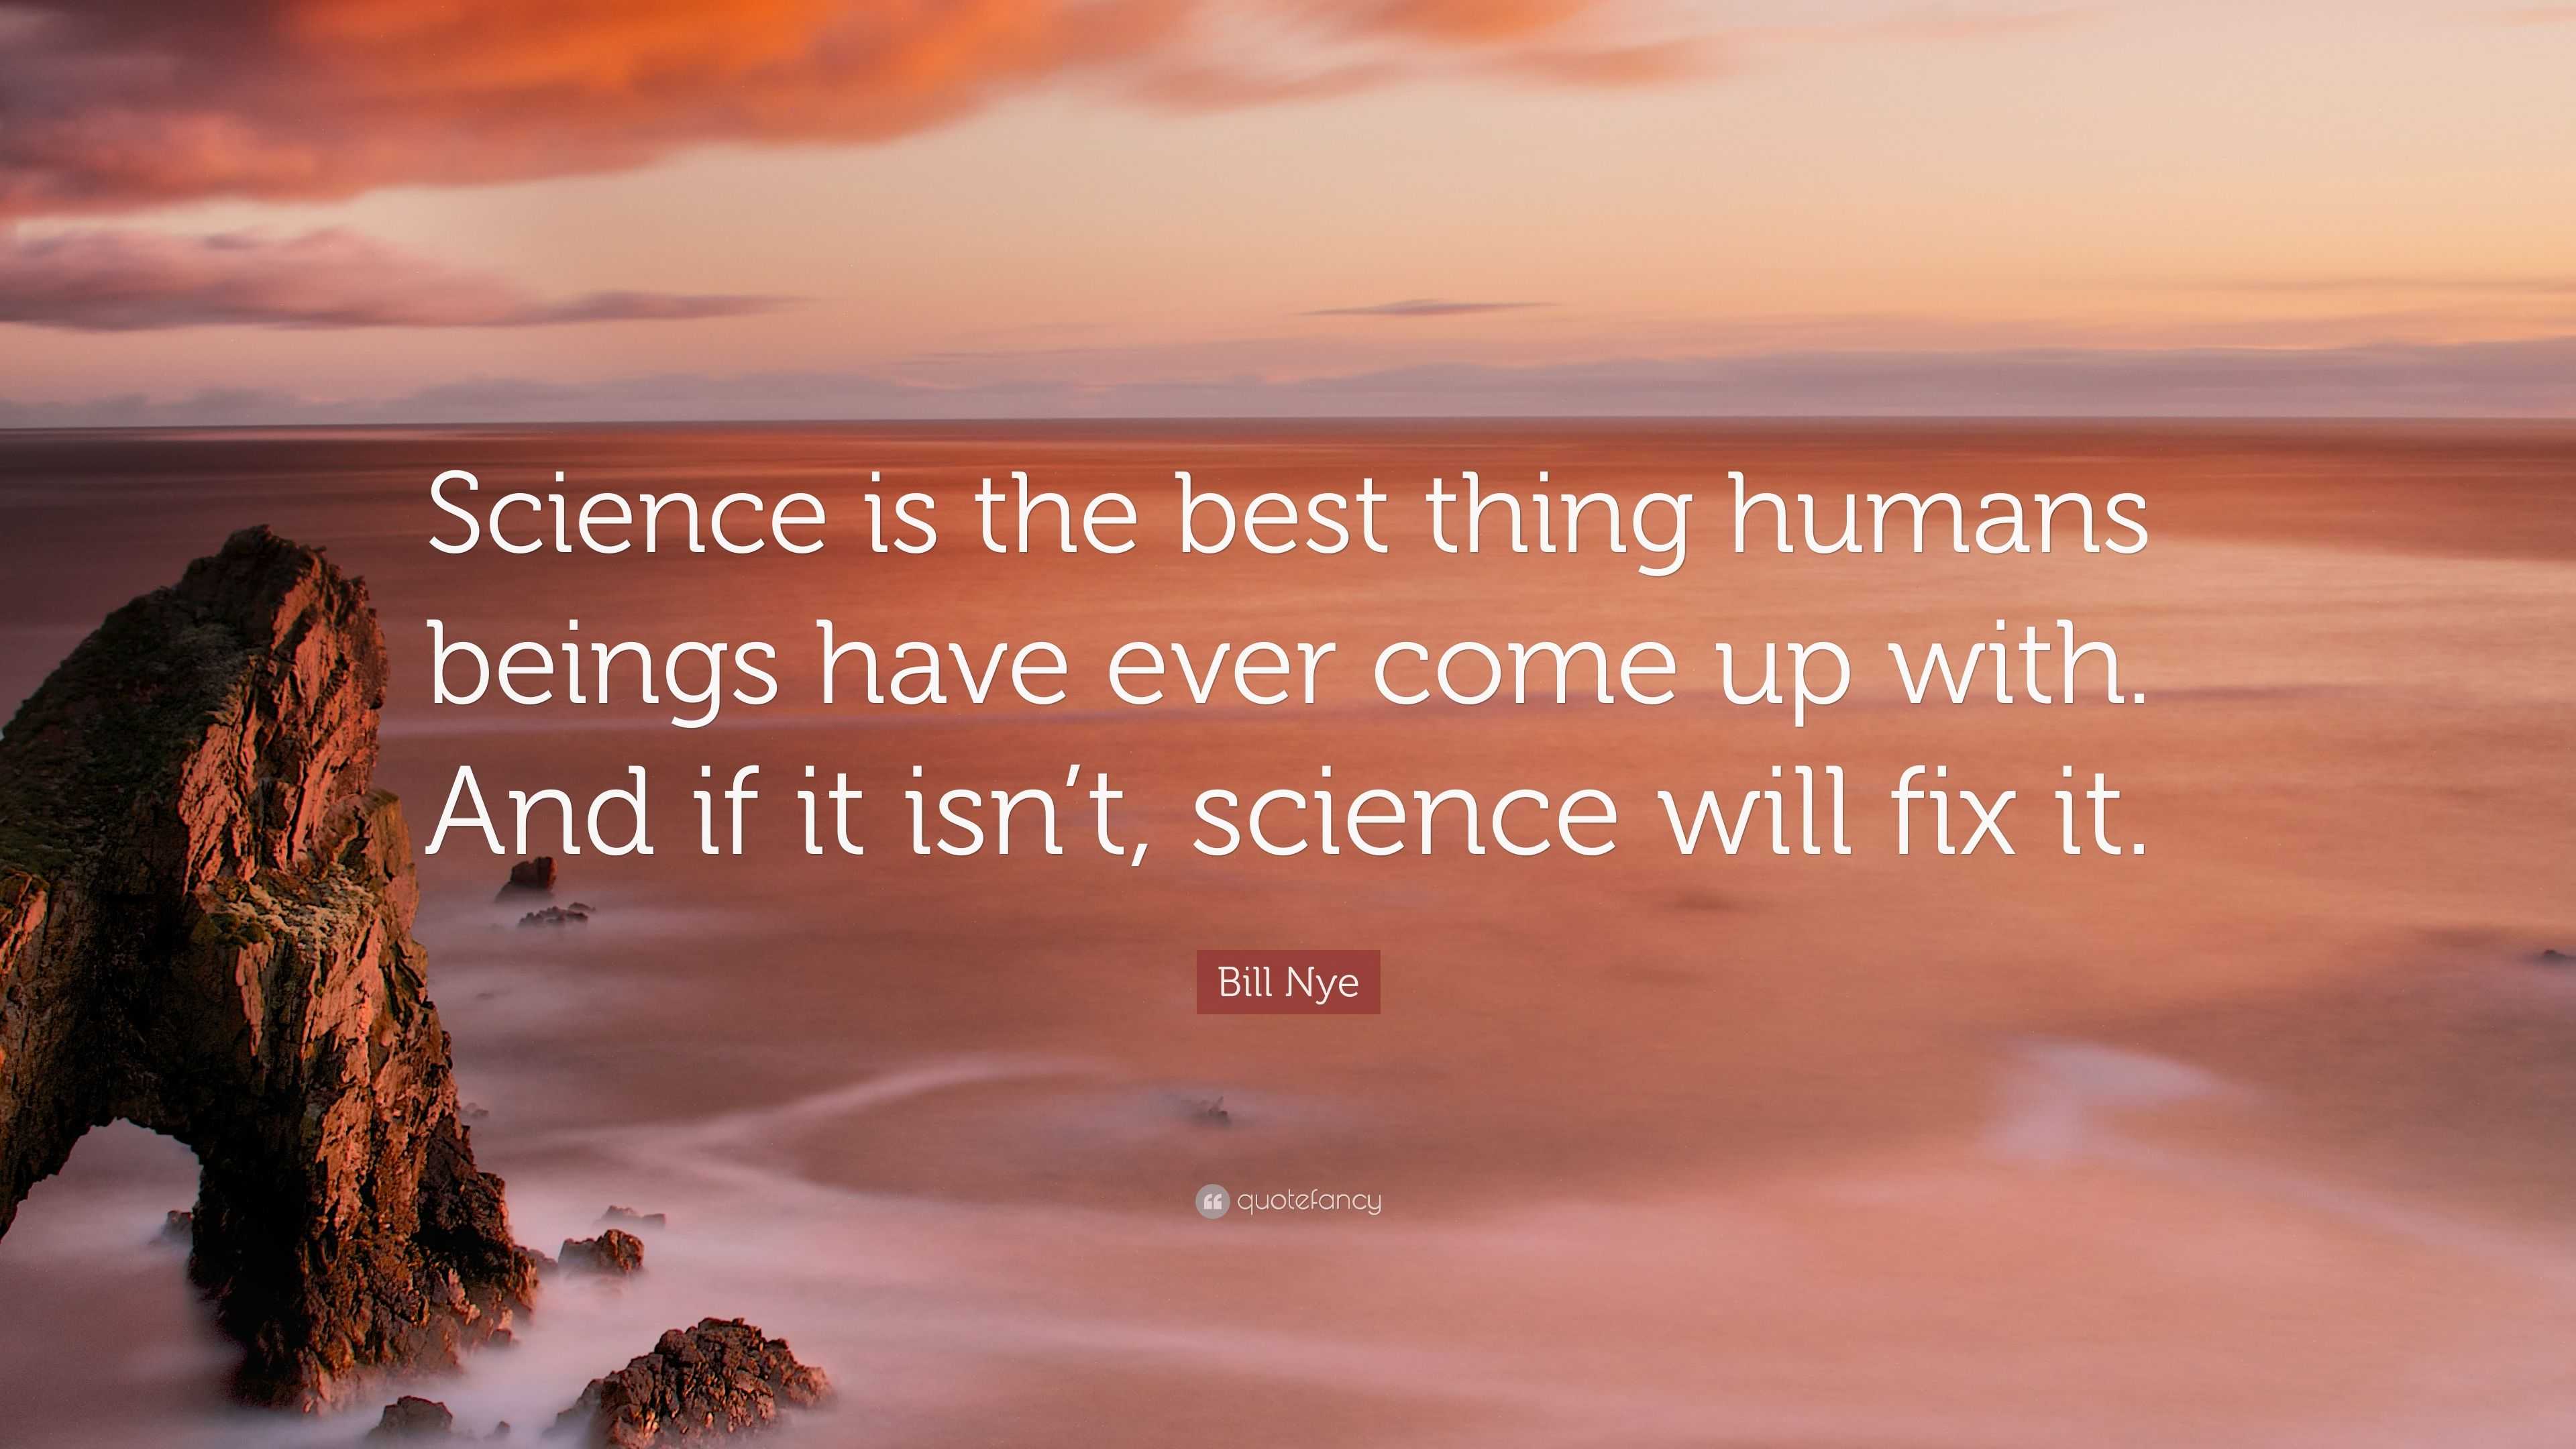 science and human comforts essay with quotations